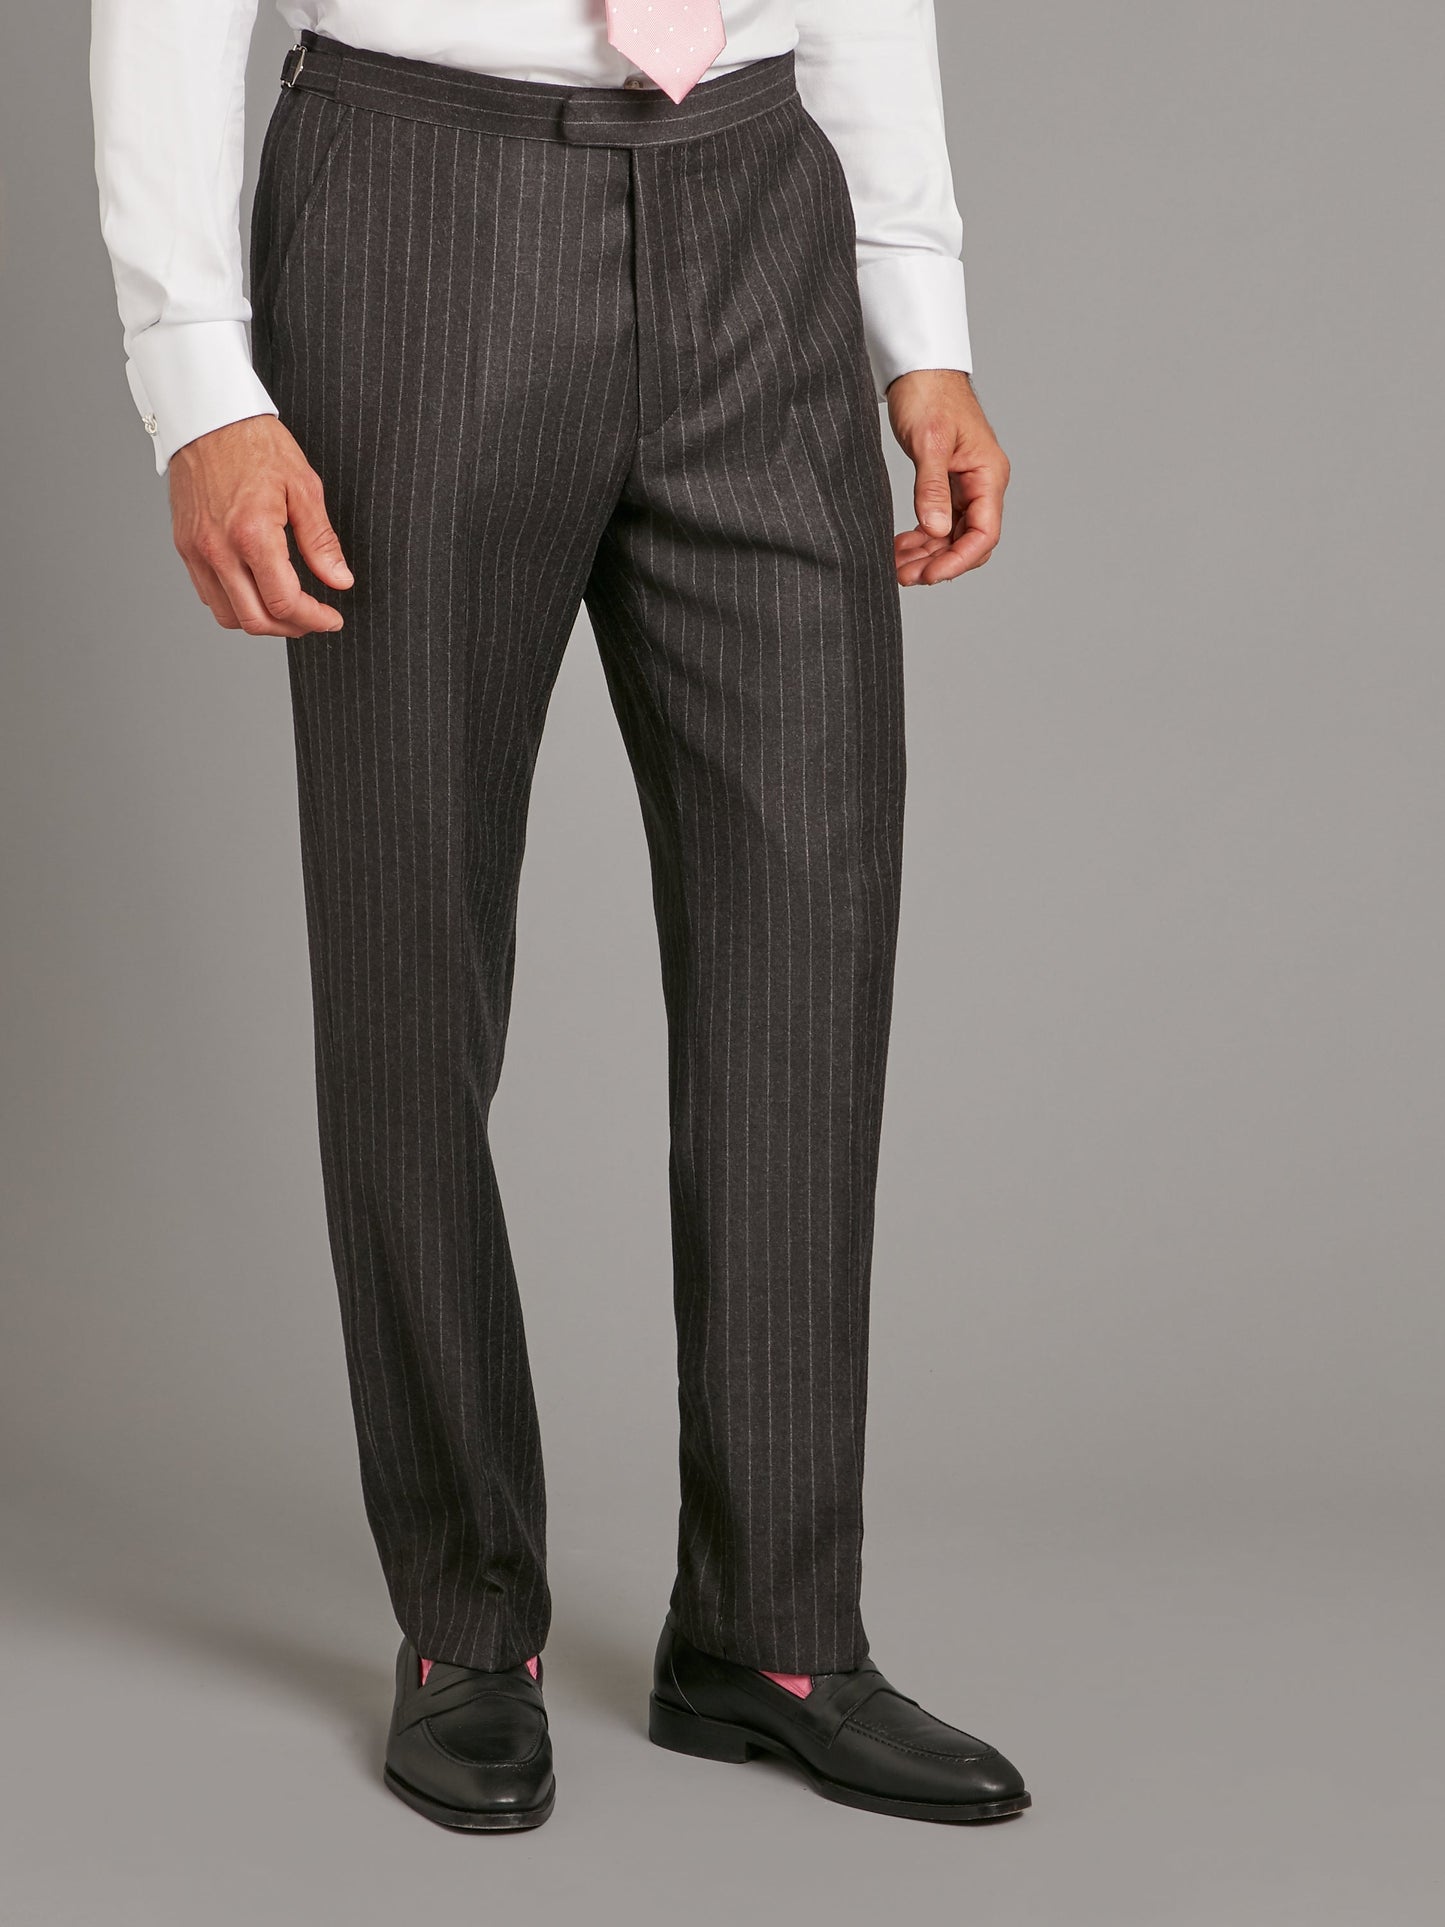 carlyle suit chalk stripe flannel charcoal 6